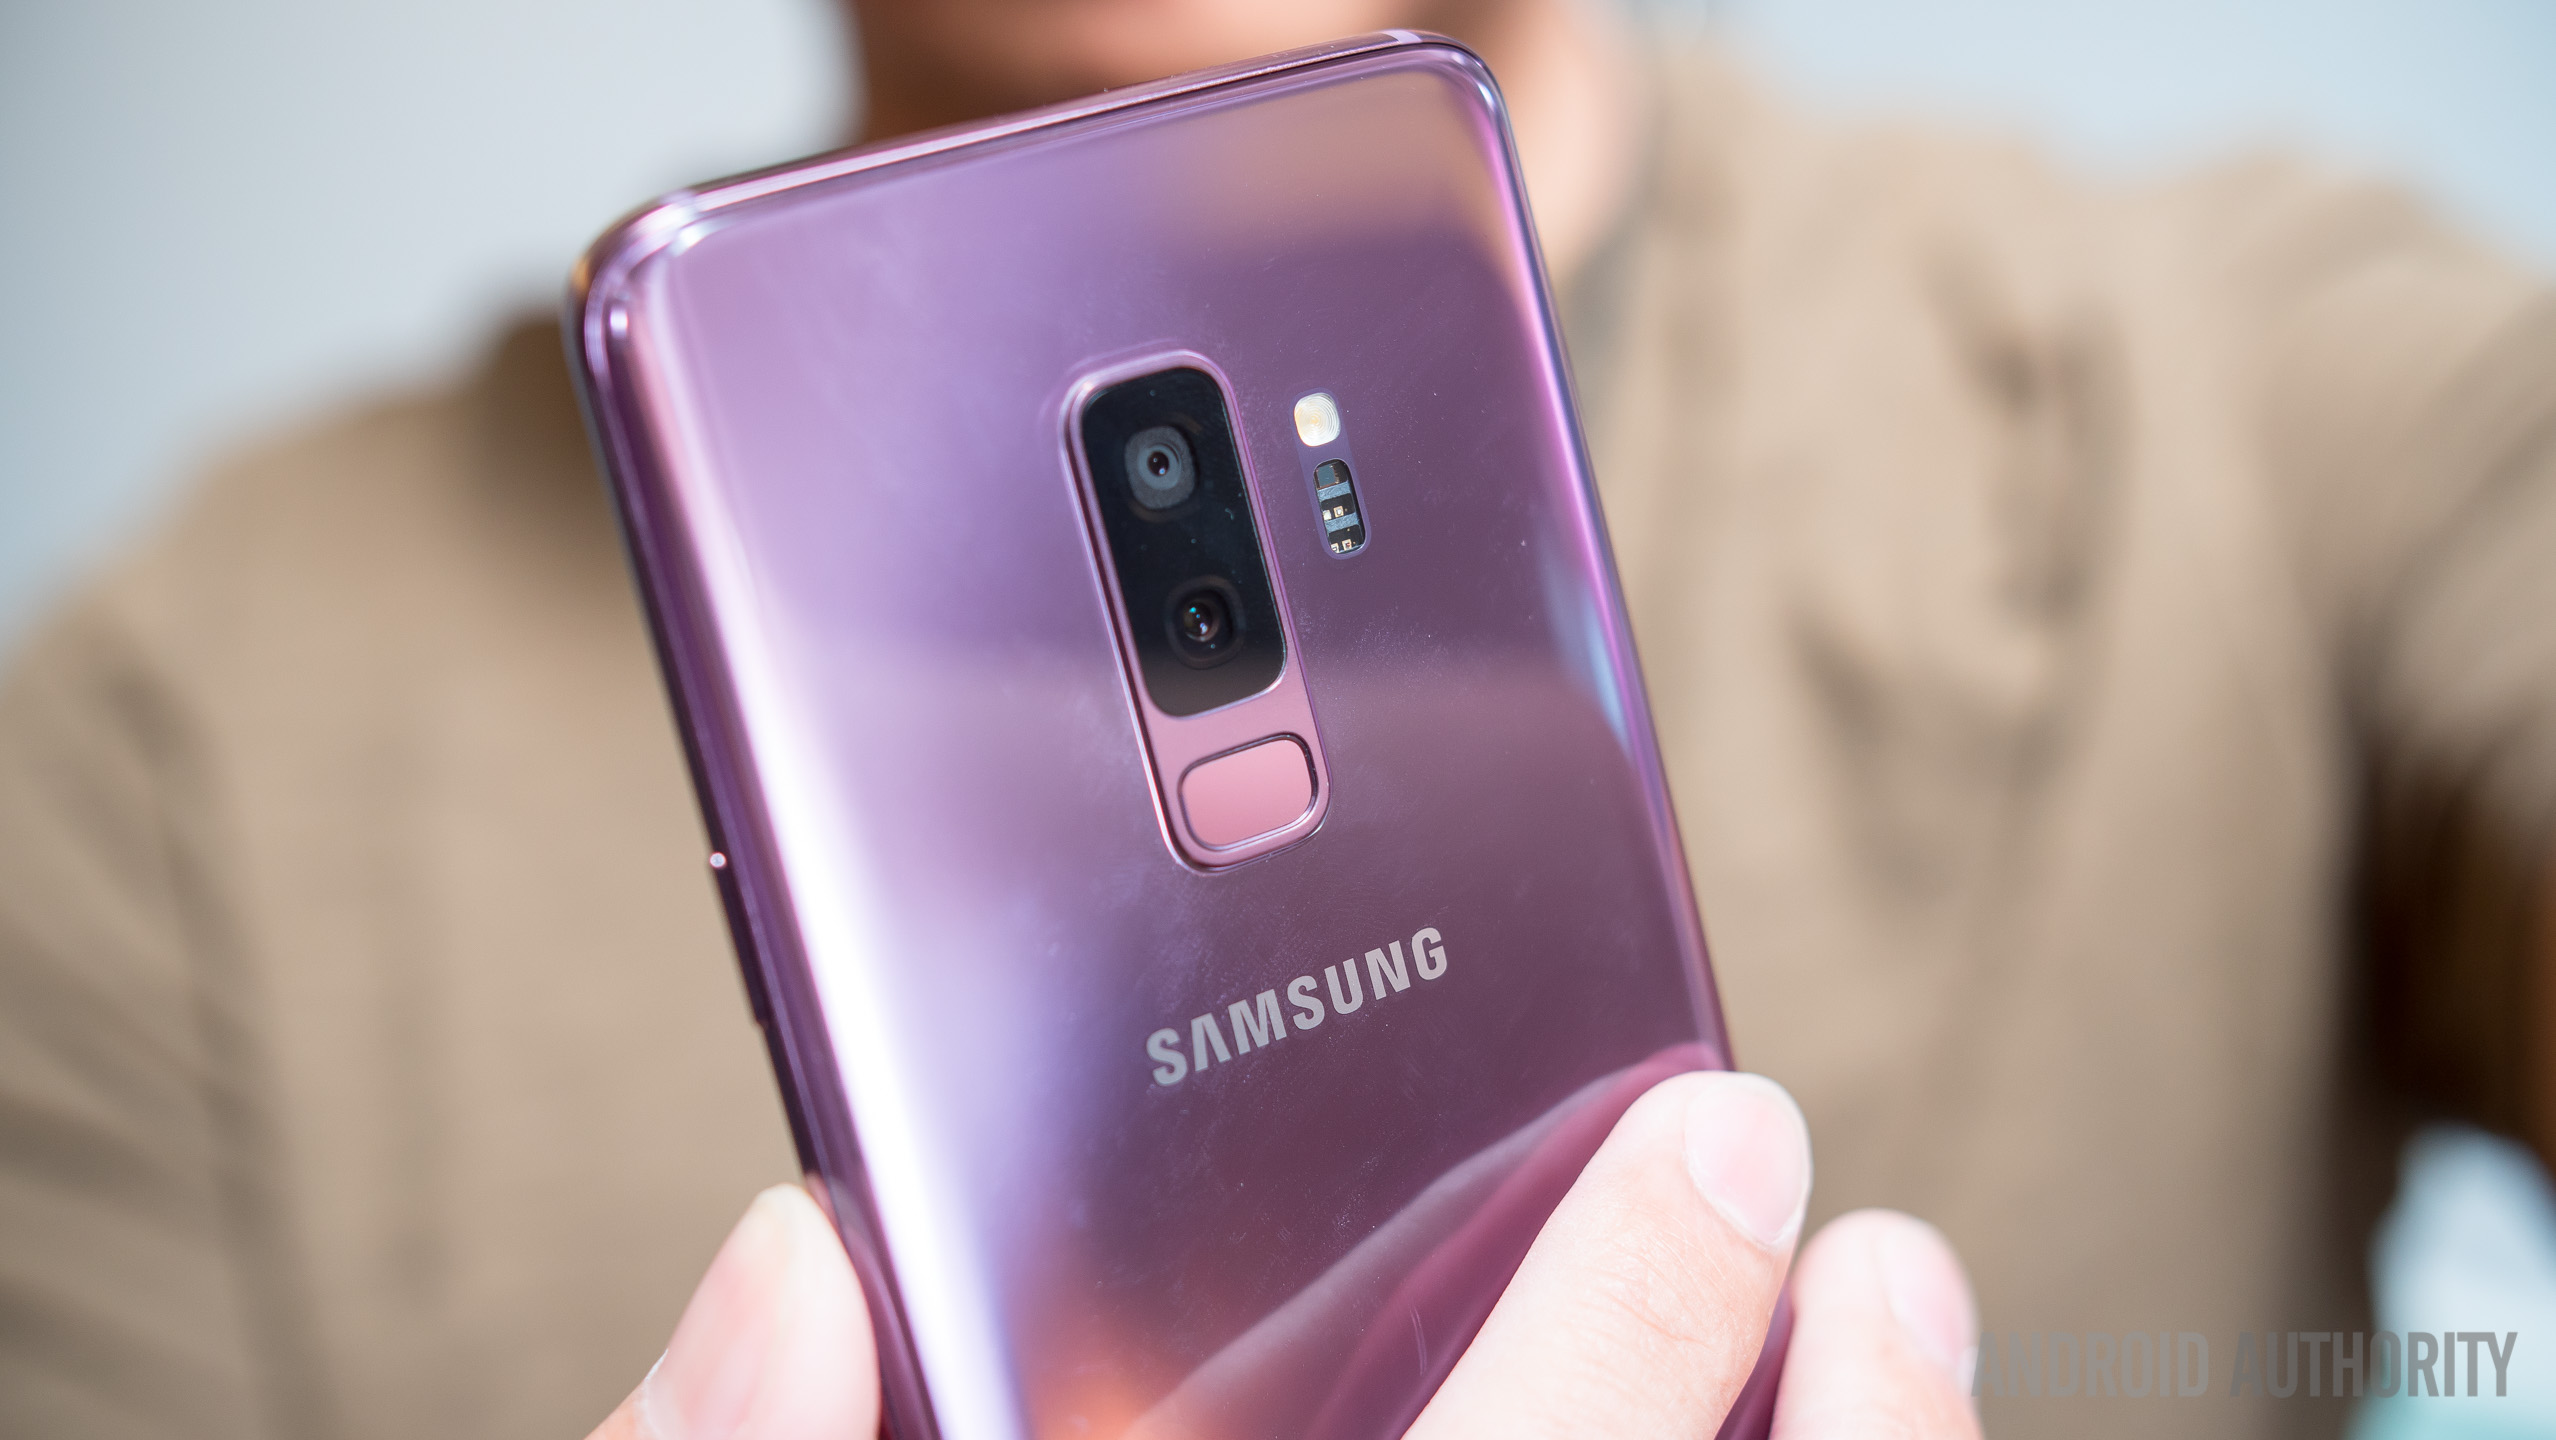 Fabel Vrijstelling afdeling Samsung Galaxy S9 review: Follow the leader